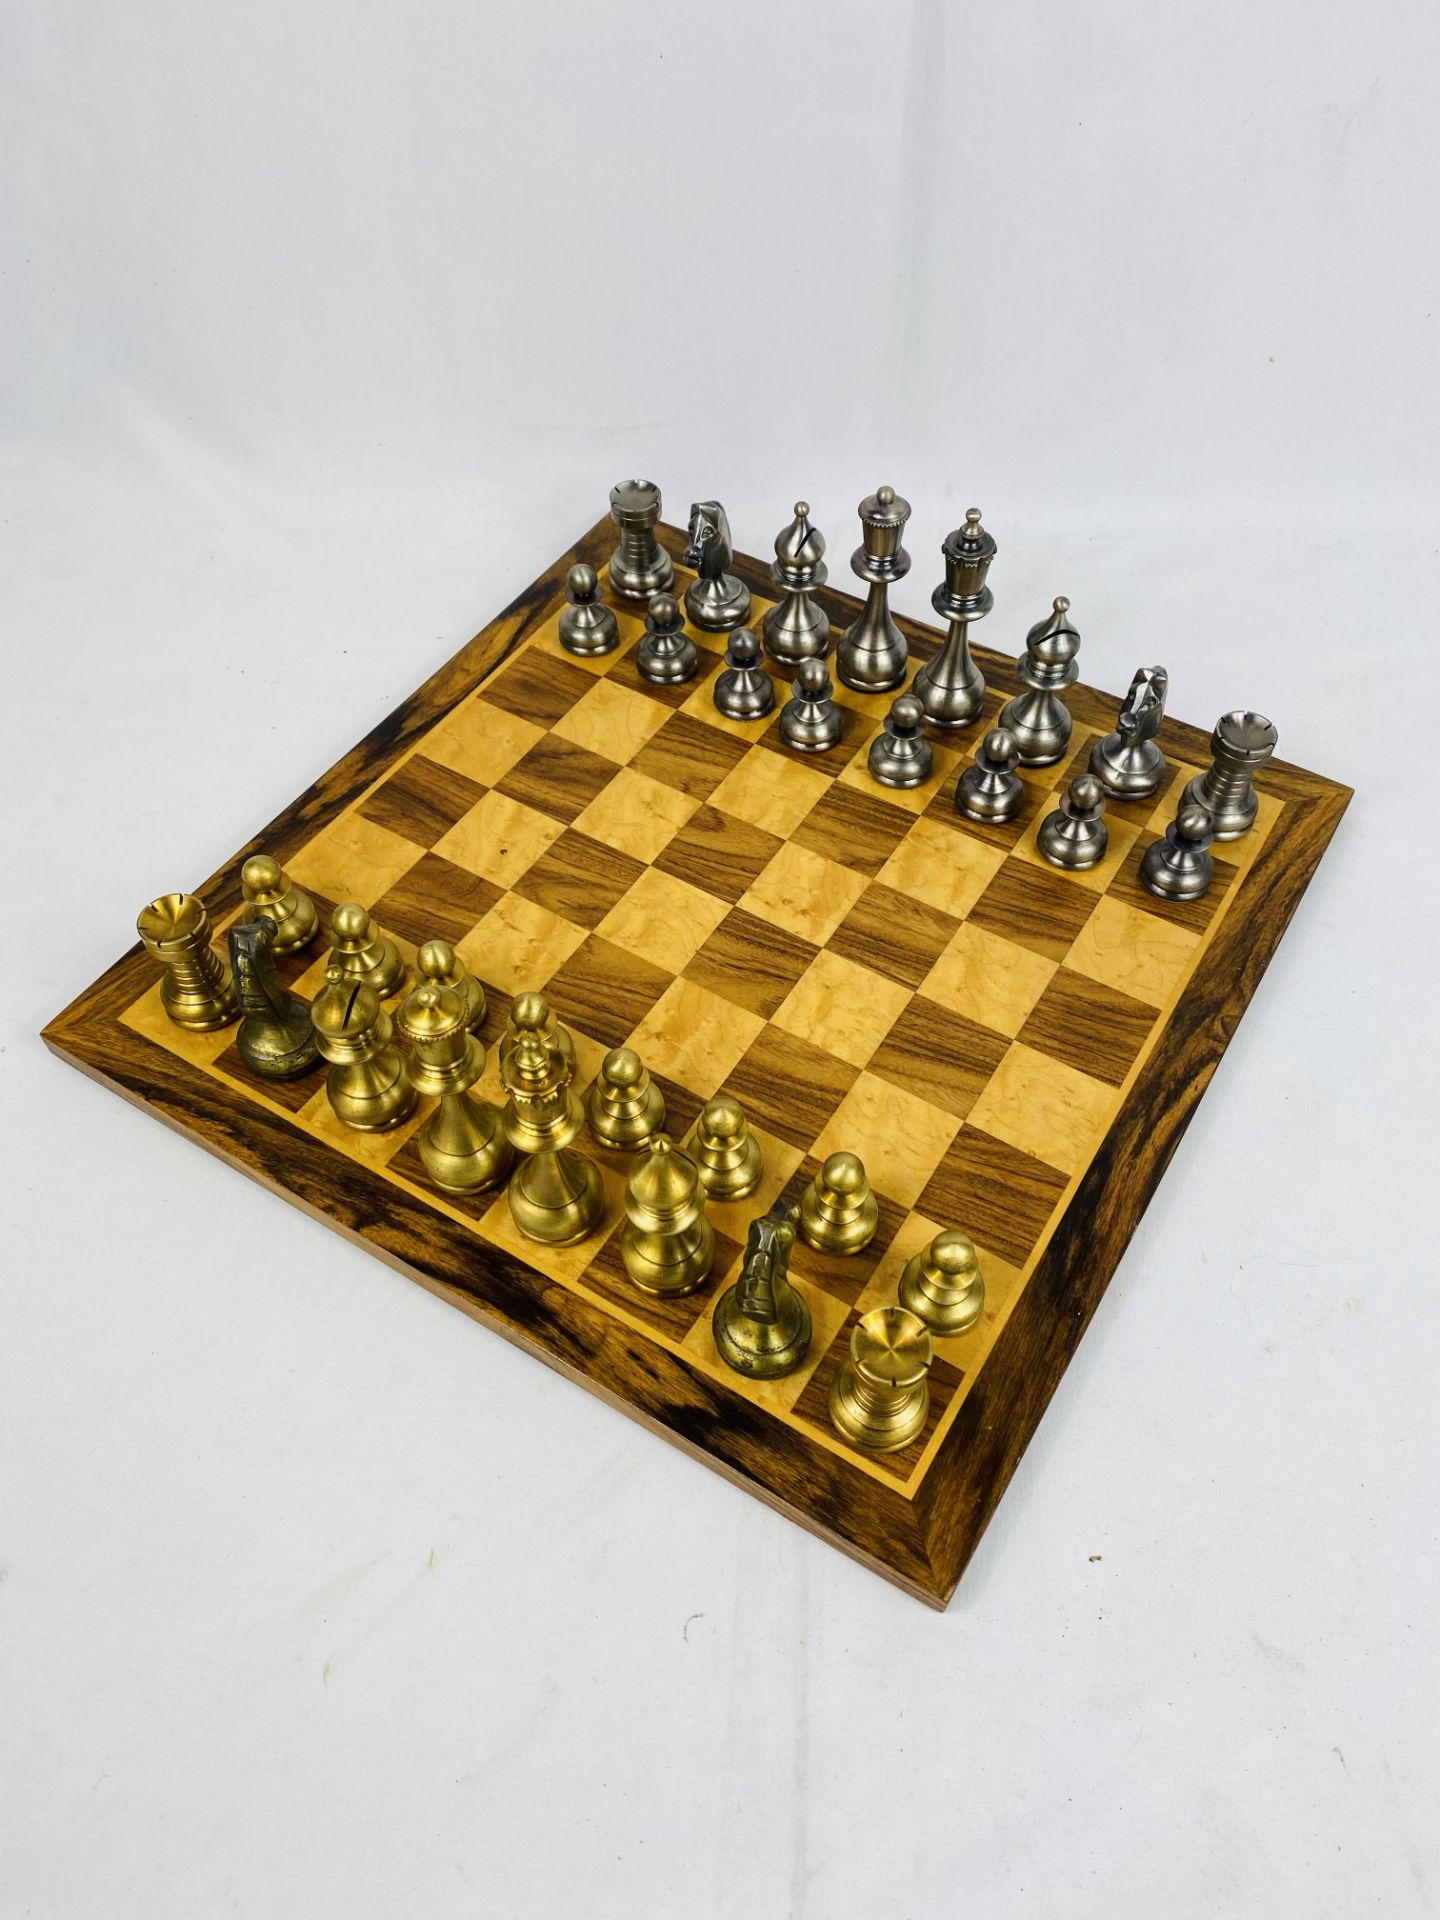 A metal chess set; a wood chess set, and wood chess board - Image 3 of 5